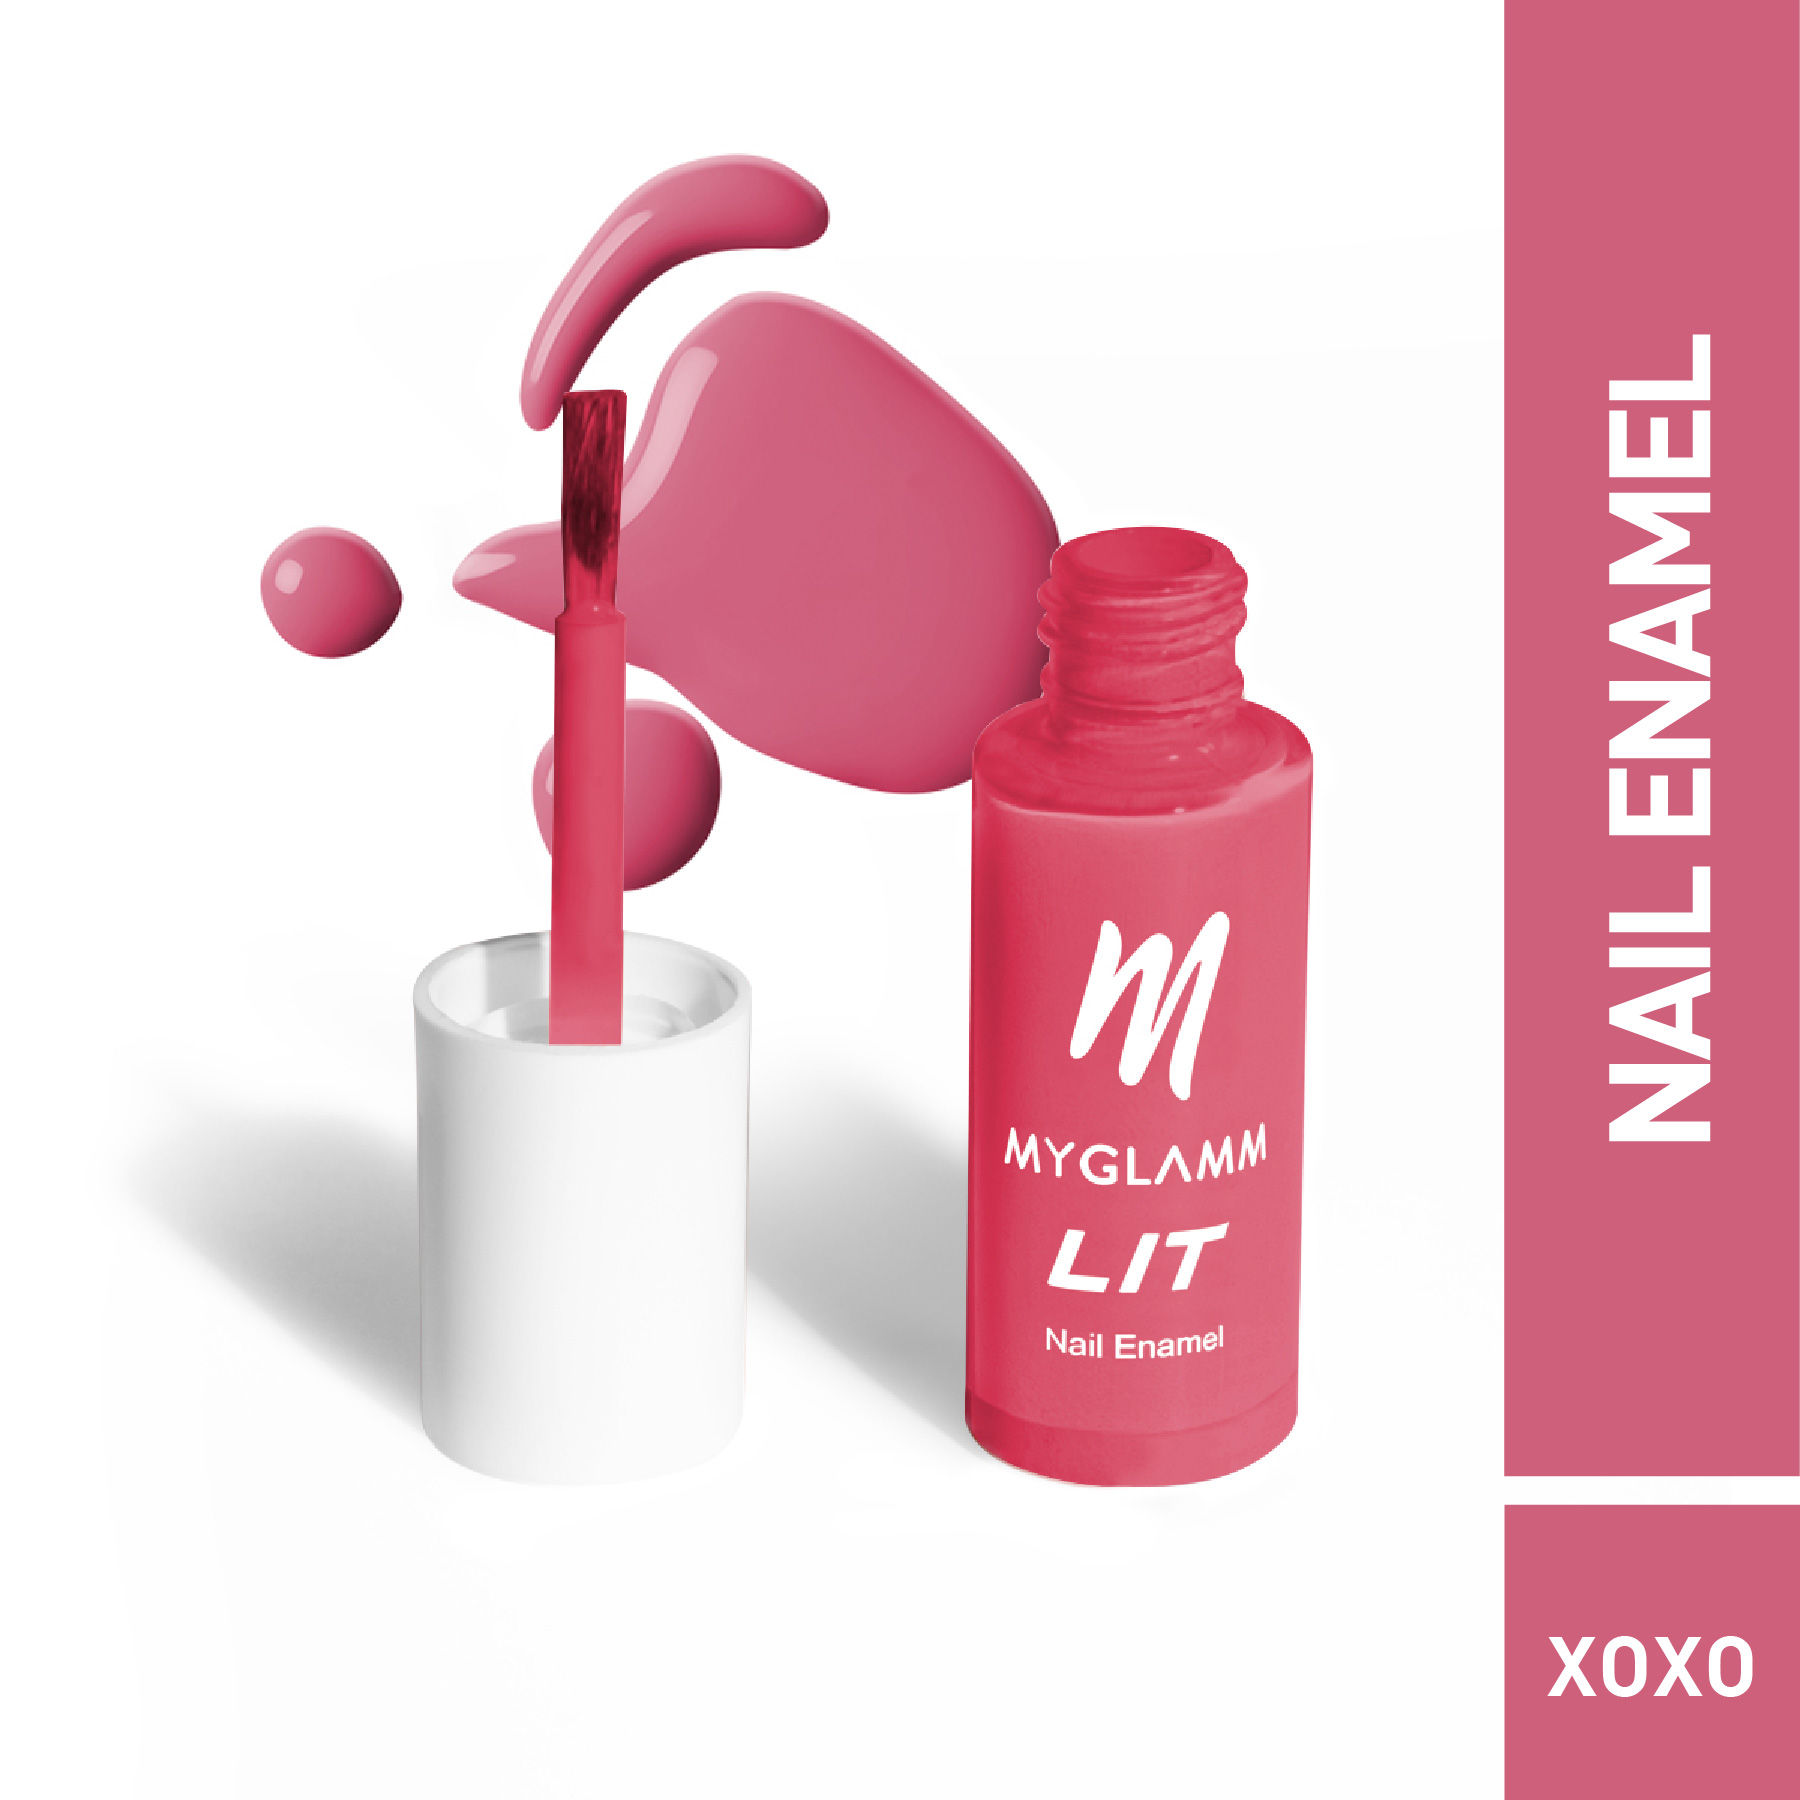 MyGlamm - Hit like if you want some Vacay Vibes for your nails!!🌴🌴 . . .  Click on the link https://bit.ly/2LuMAKv to get vibin' 🛒🛒 . . #MyGlamm  #myglammCARES #Wanderlust #NailCare #NailPaint #